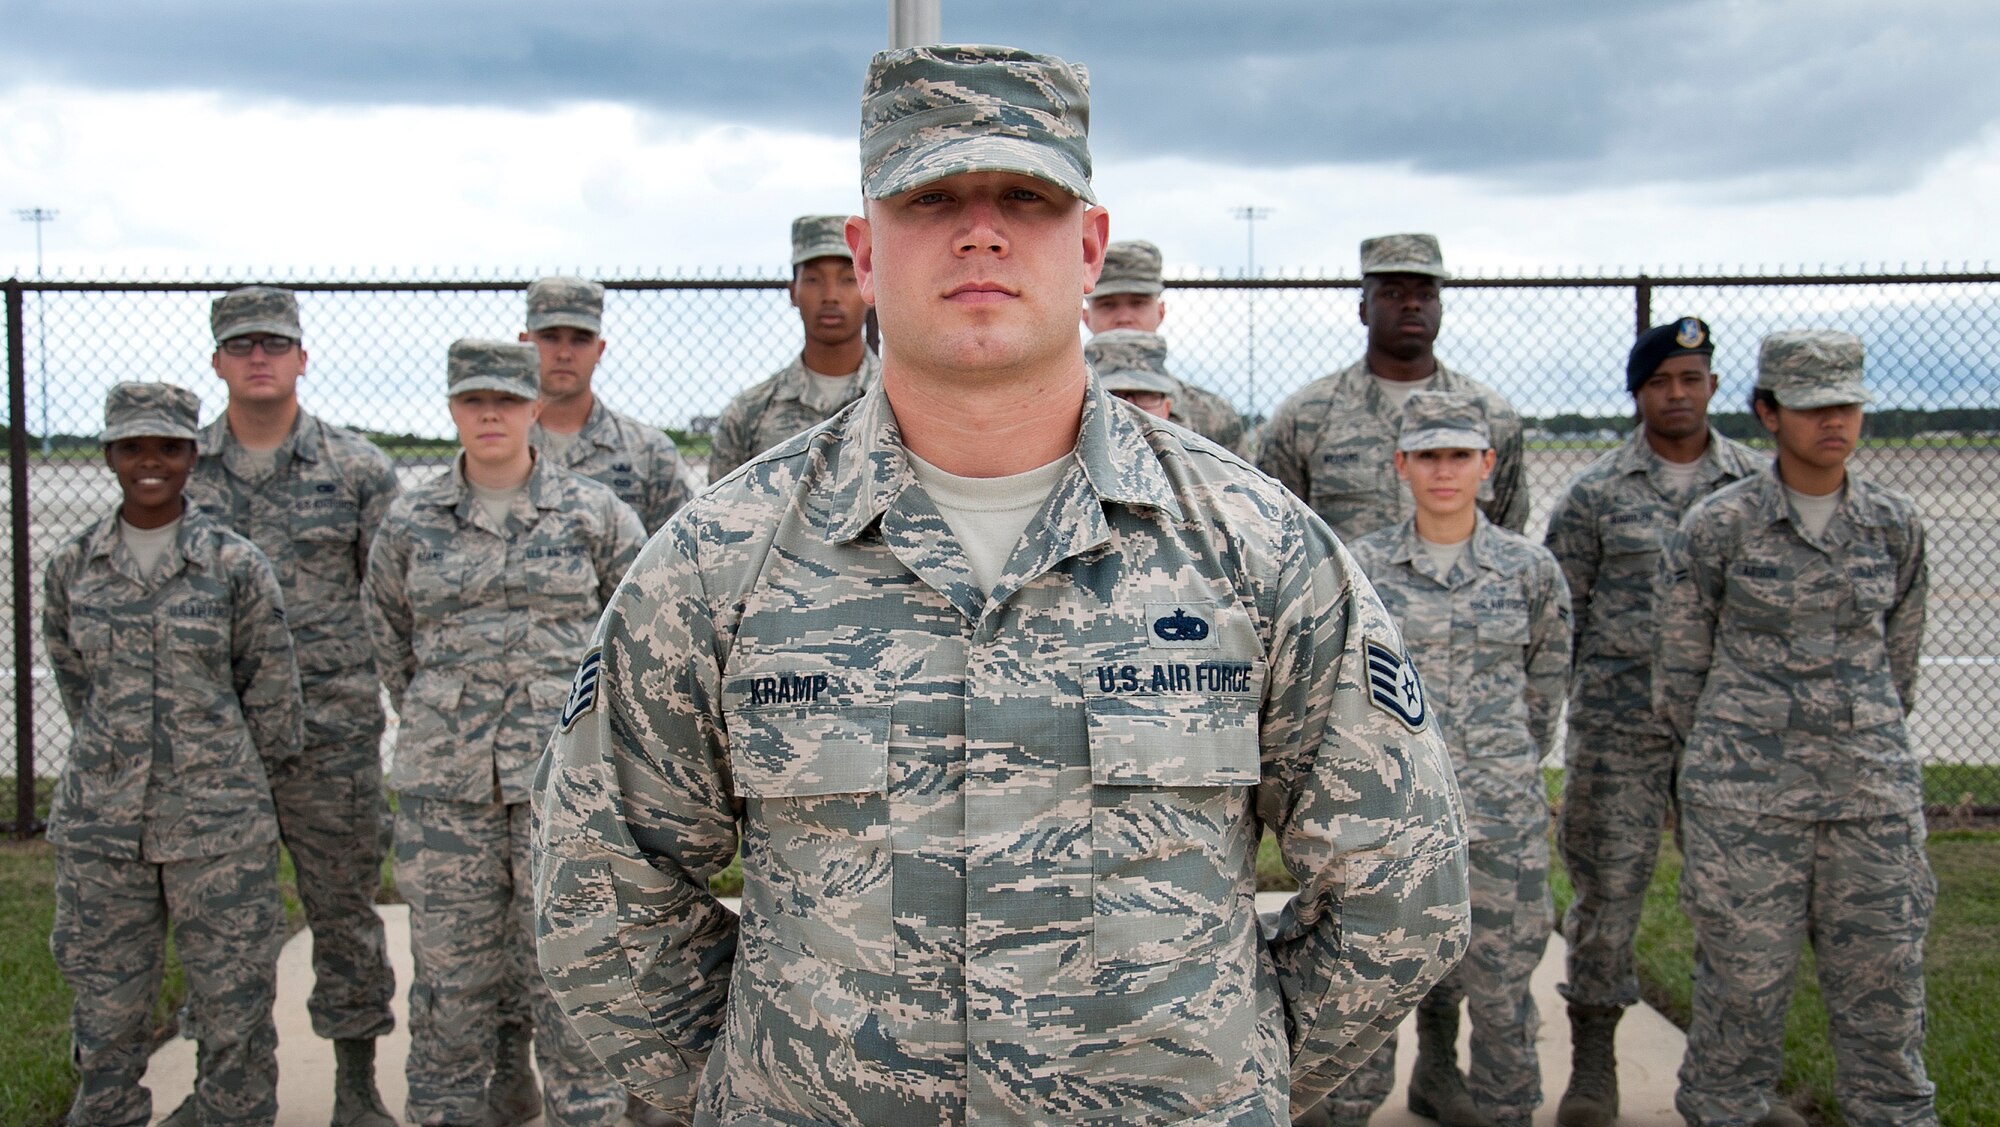 Staff Sgt. Brian Kramp, 6th Maintenance Squadron crew chief and First Term Airmen Class team lead, poses for a group photo with his final FTAC students Sept. 17, 2015, at MacDill Air Force Base, Fla. As the team lead, Kramp is responsible for building and setting up the schedule for the course, as well as creating class rosters for FTAC and all other professional development courses. (U.S. Air Force photo by Senior Airman Jenay Randolph/Released)